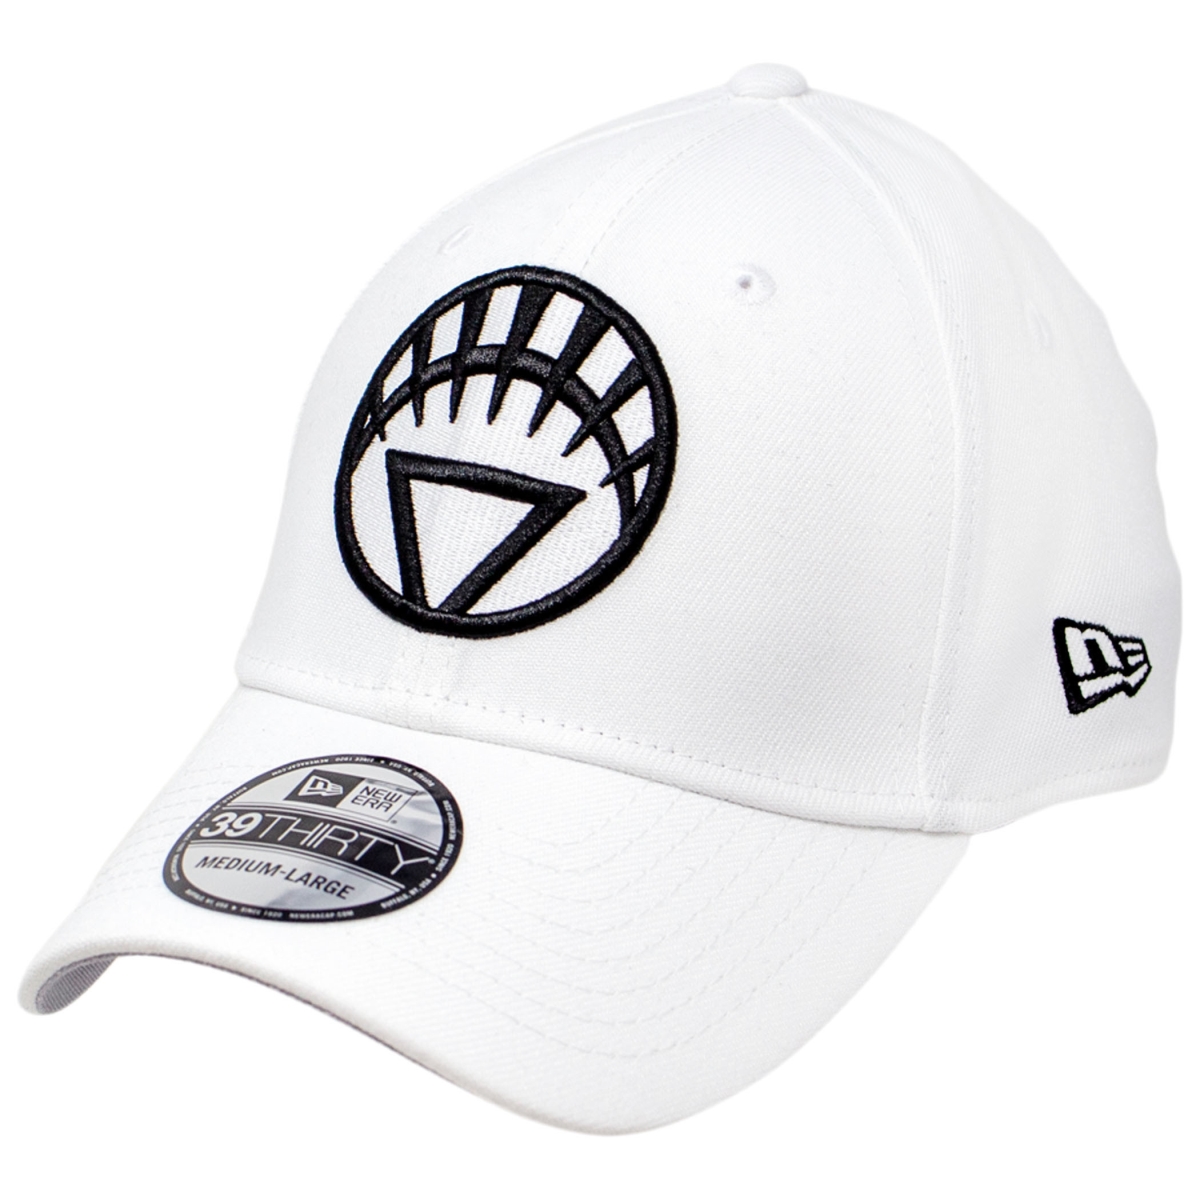 Picture of White Lantern 804144-Large-XLarge Color Block New Era 39Thirty Fitted Hat - Large & Extra Large